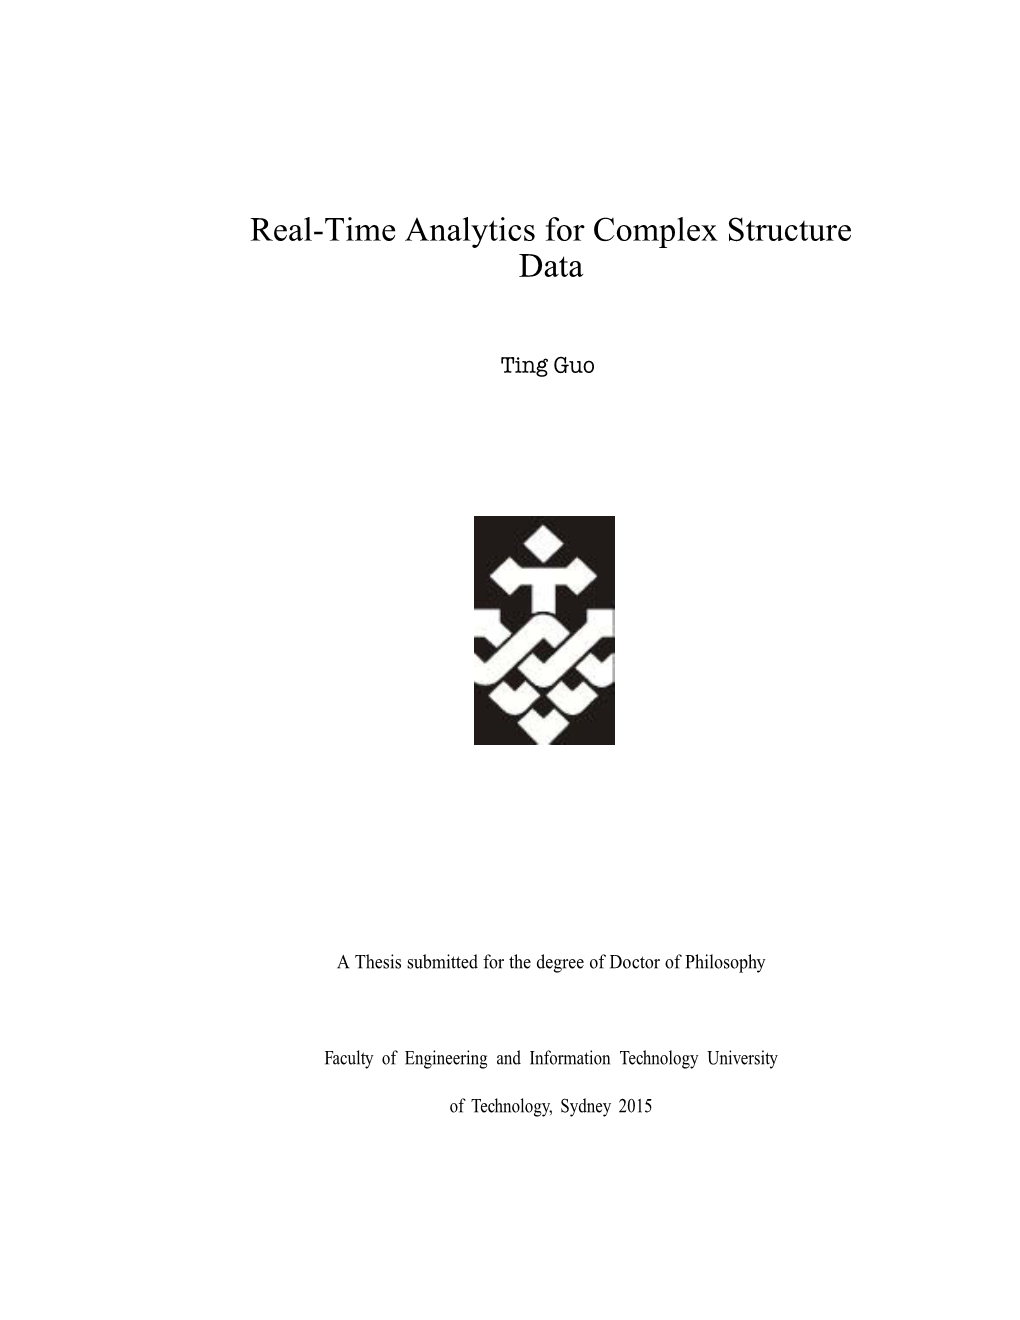 Real-Time Analytics for Complex Structure Data